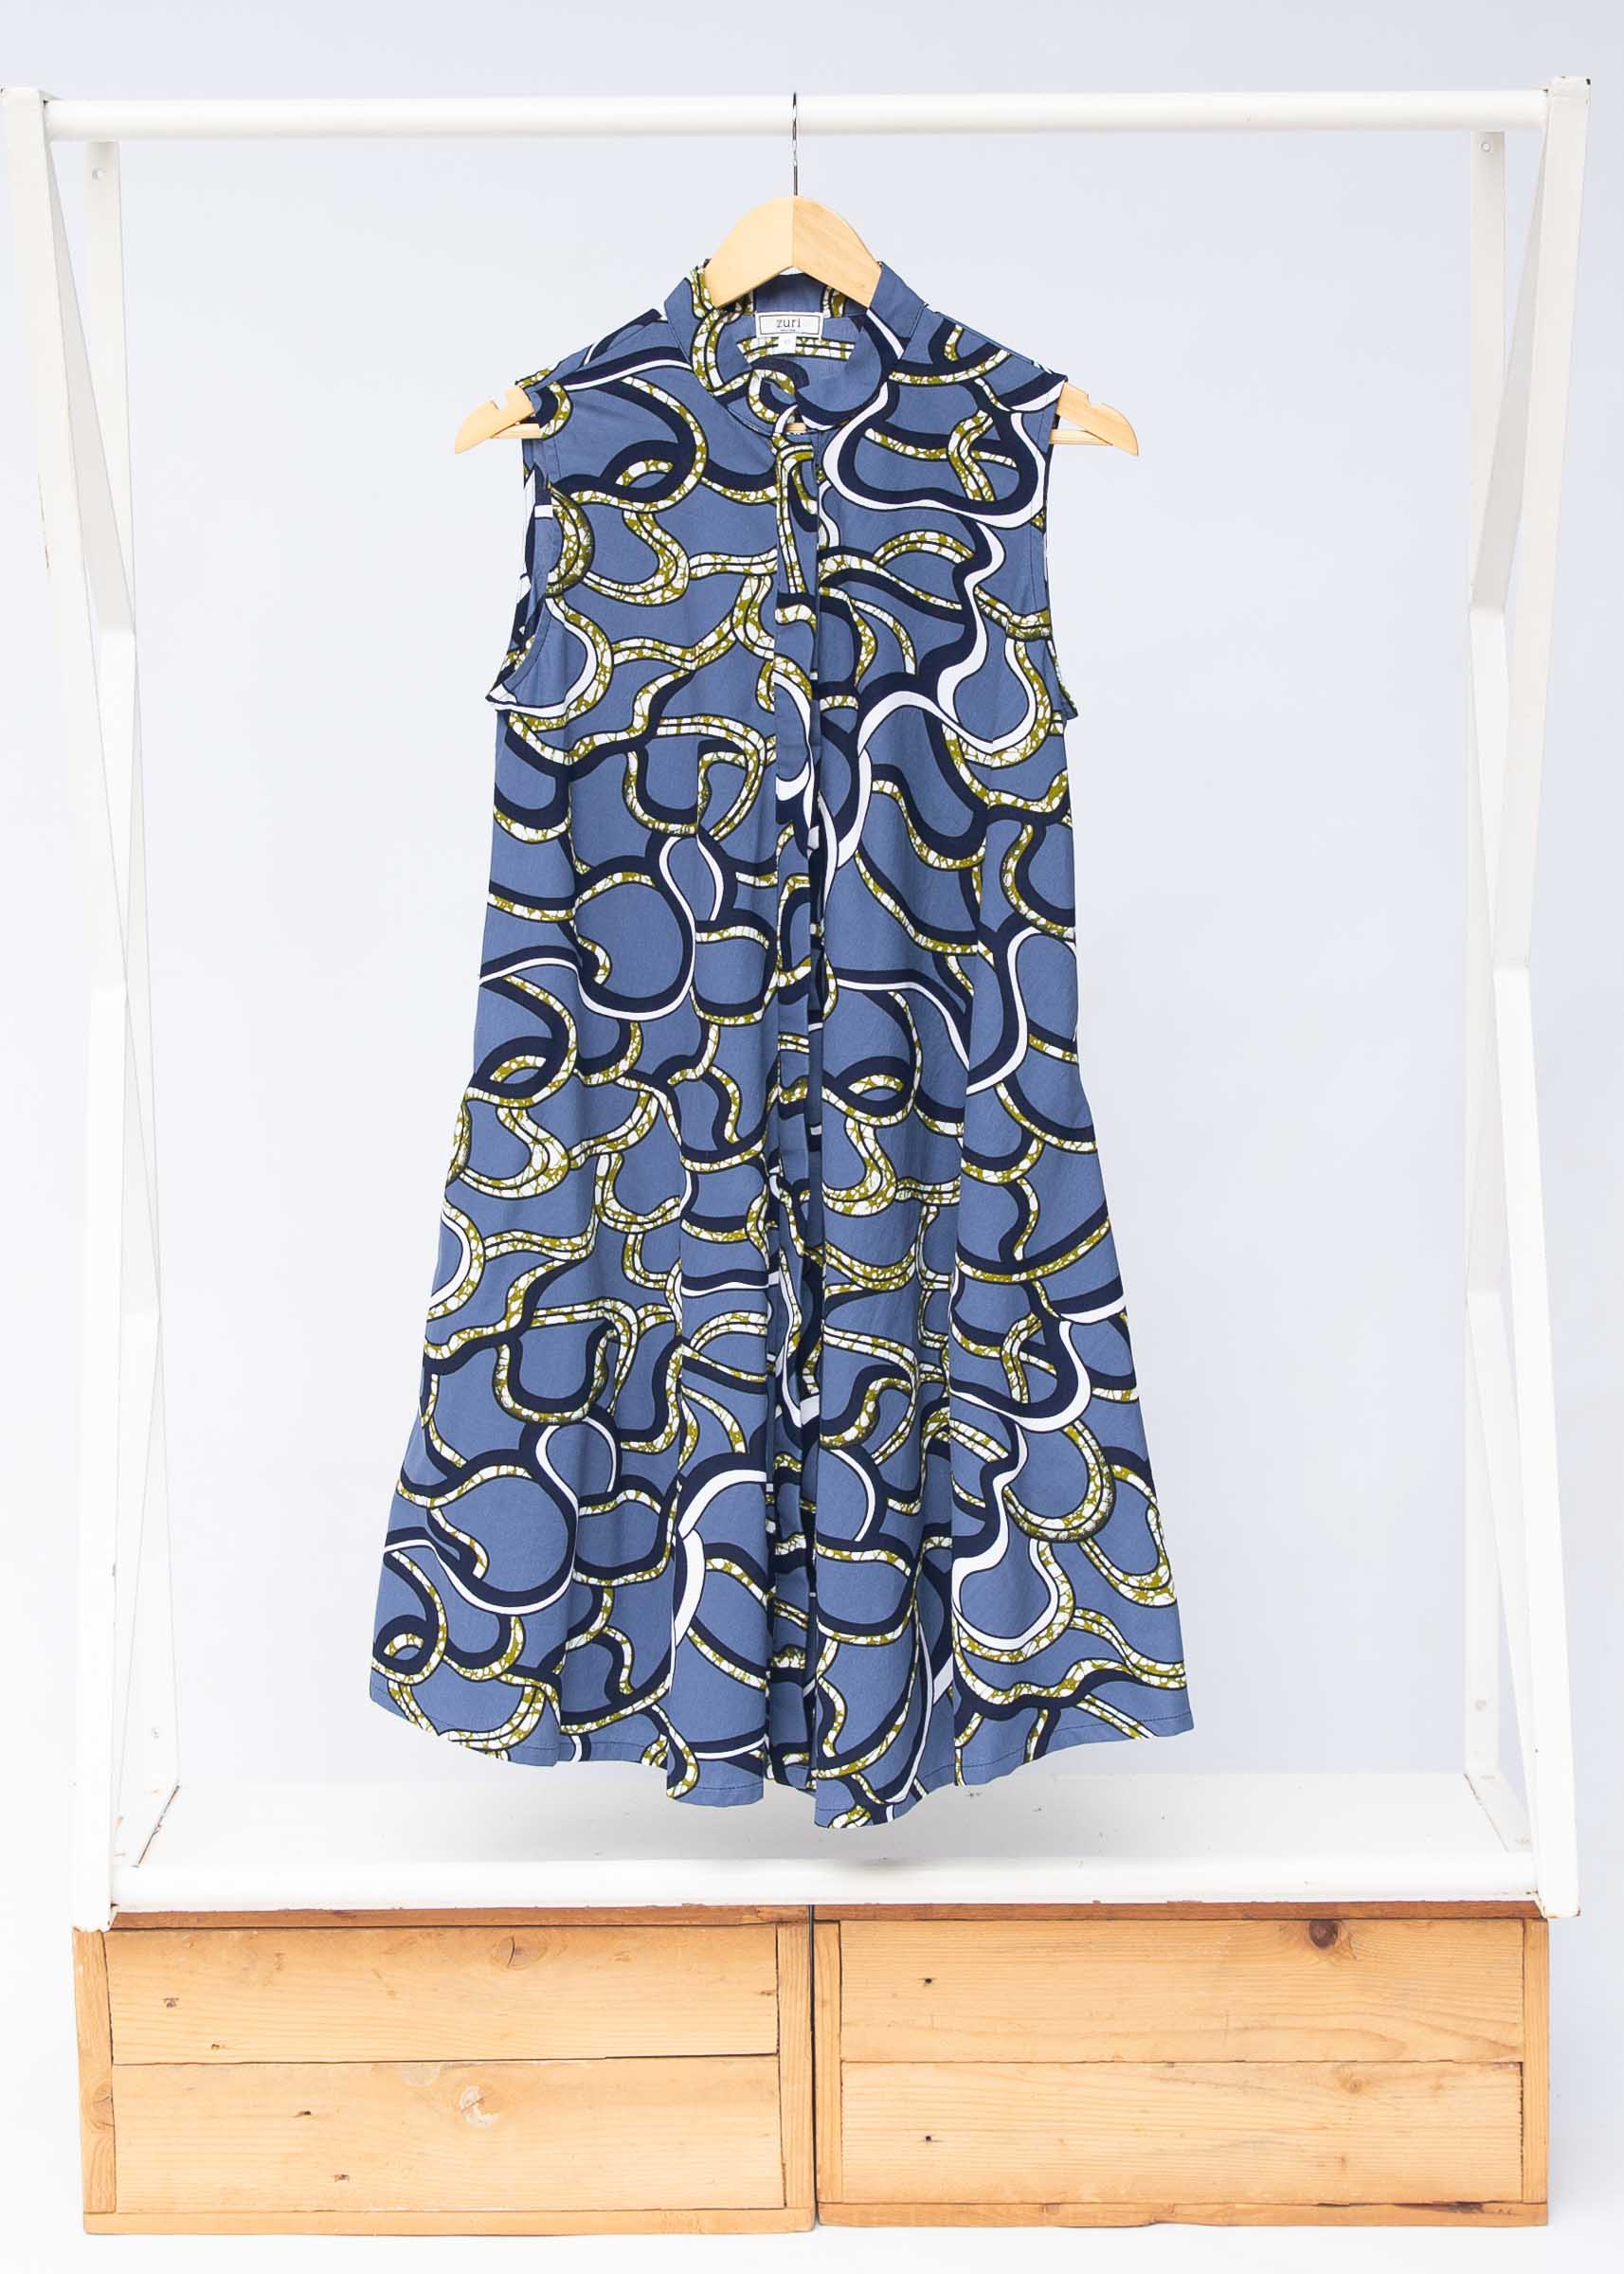 Display of blue sleeveless dress with green, white and navy squiggle design.